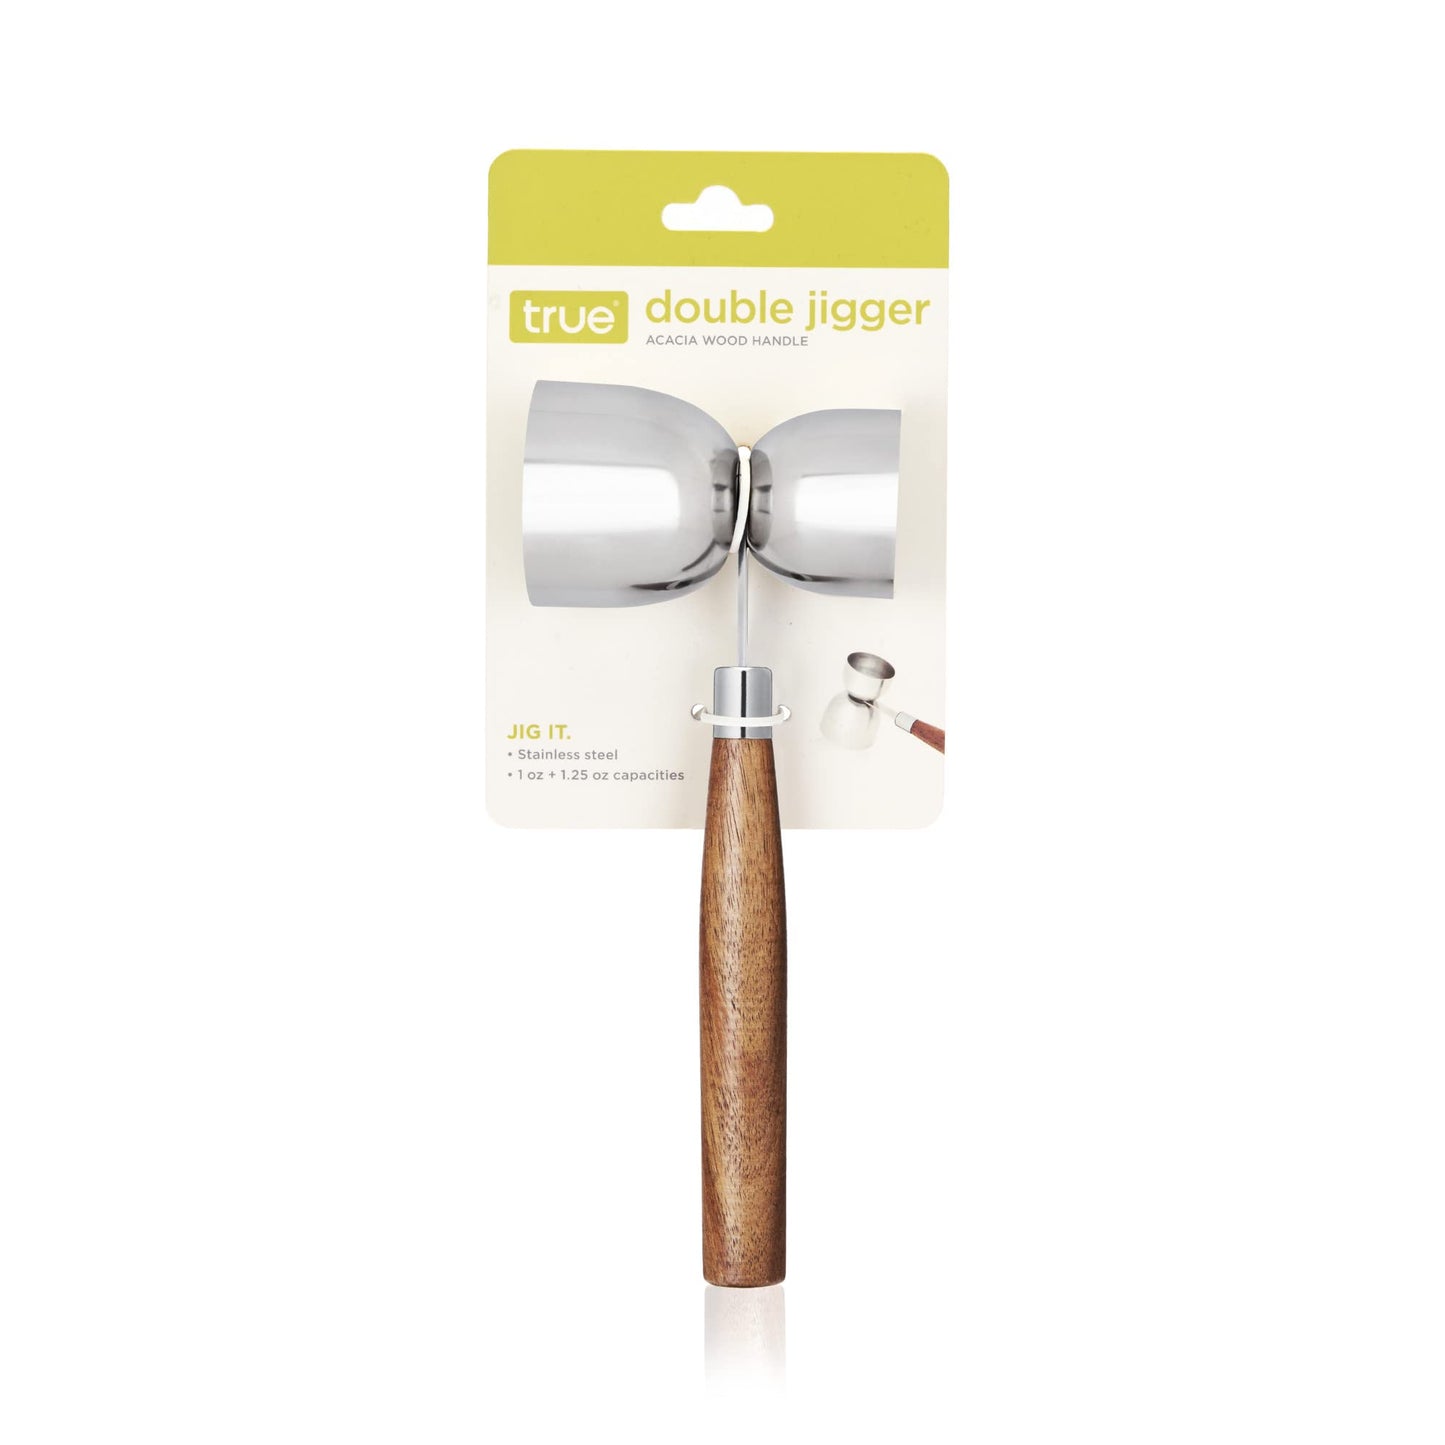 True Double Jigger with Acacia Handle, Bar Supplies, Drink Tools, Craft the Perfect Cocktails, 1oz & 1.25oz Capacities, Stainless Steel